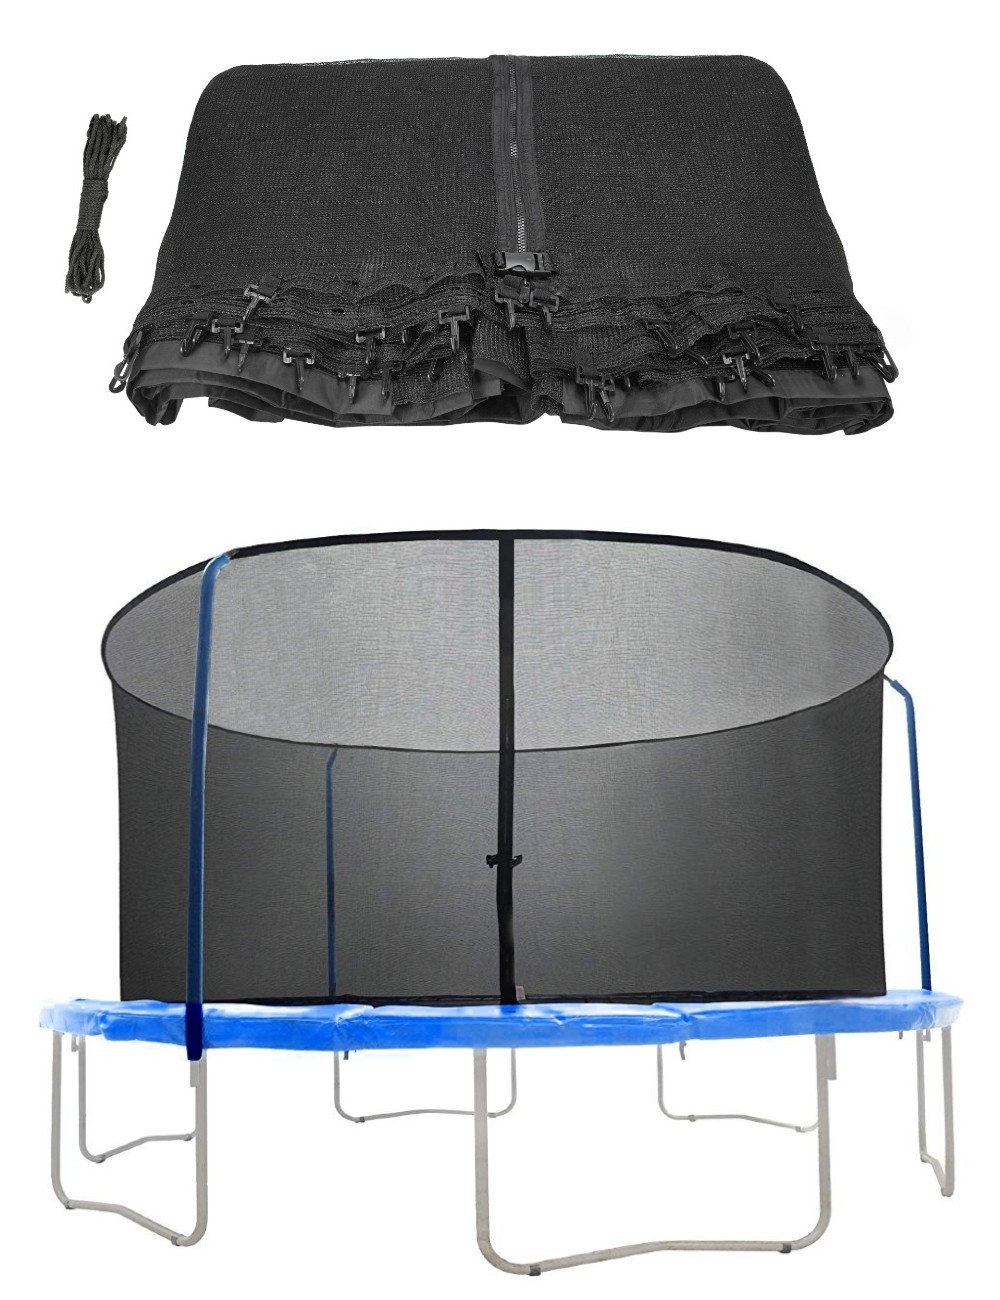 Trampoline Replacement Enclosure Safety Net for 8 ft. Round Frames using 3 Curved Poles and Top Ring - Net Only